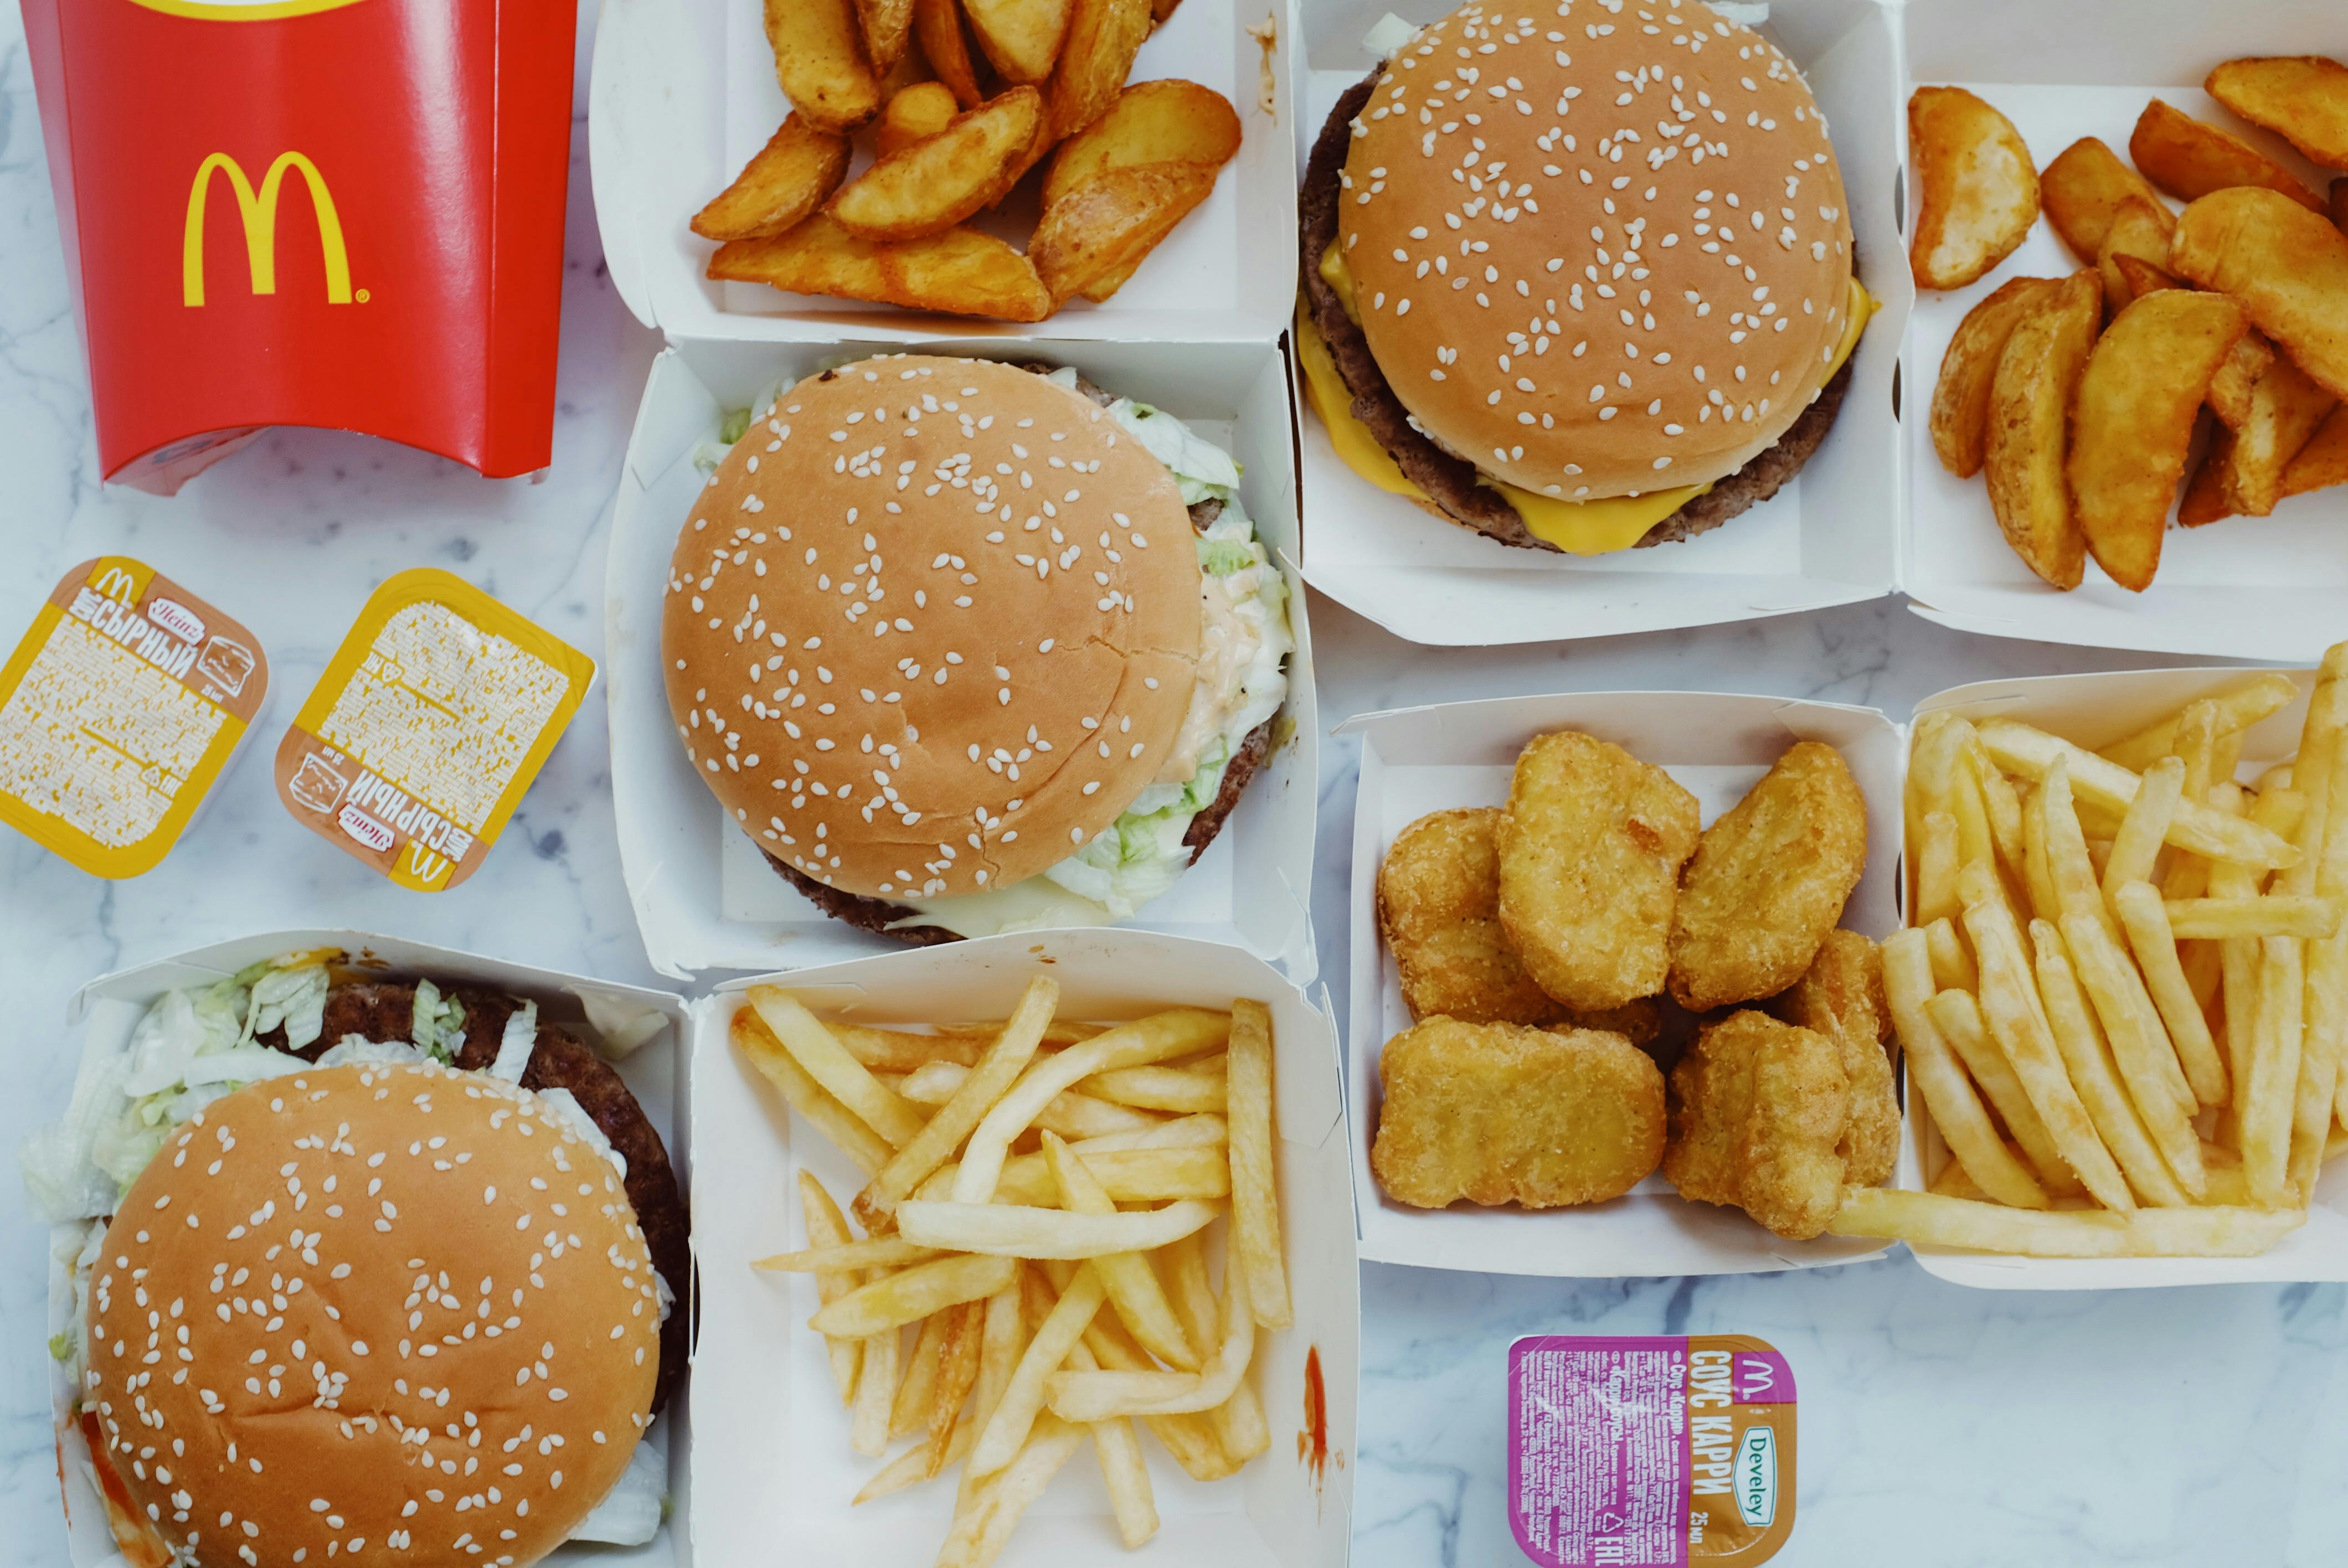 Collection of junk food having burger, fried potato, cheese